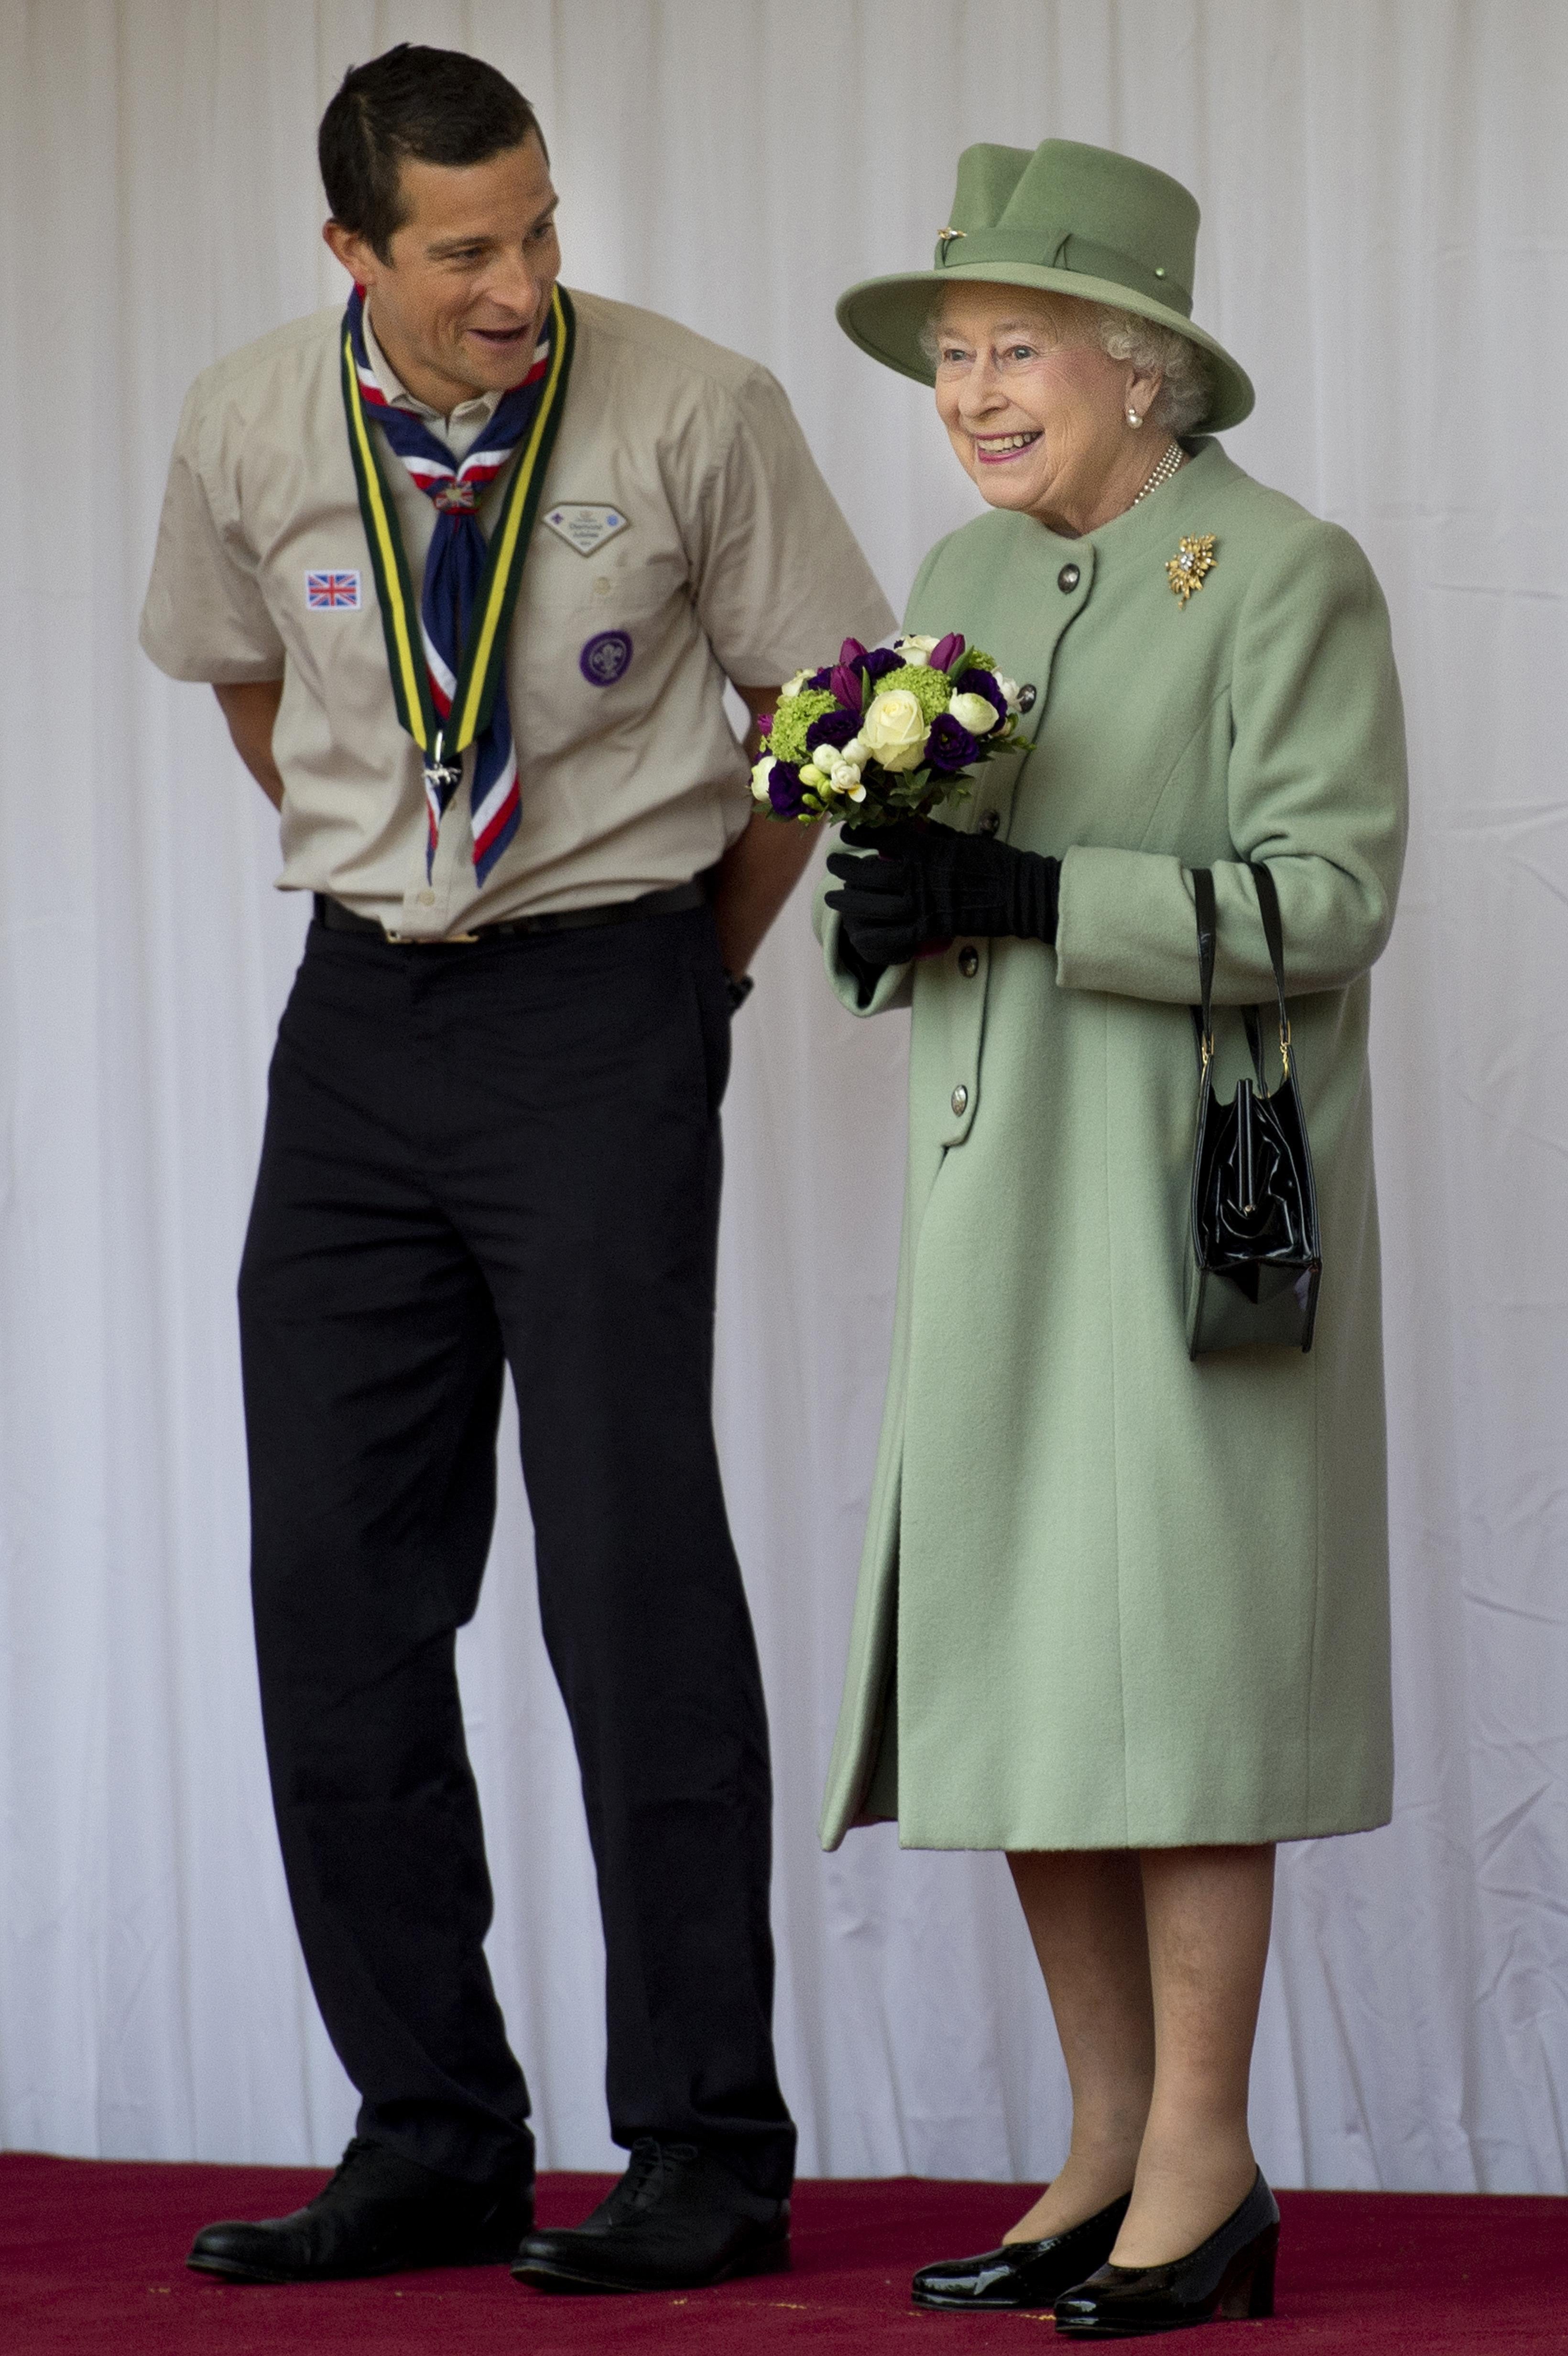 Chief Scout, Bear Grylls, left, chats with the Queen during a review of the Queen’s Scouts at Windsor Castle, in Berkshire (Ben Stansall/PA)